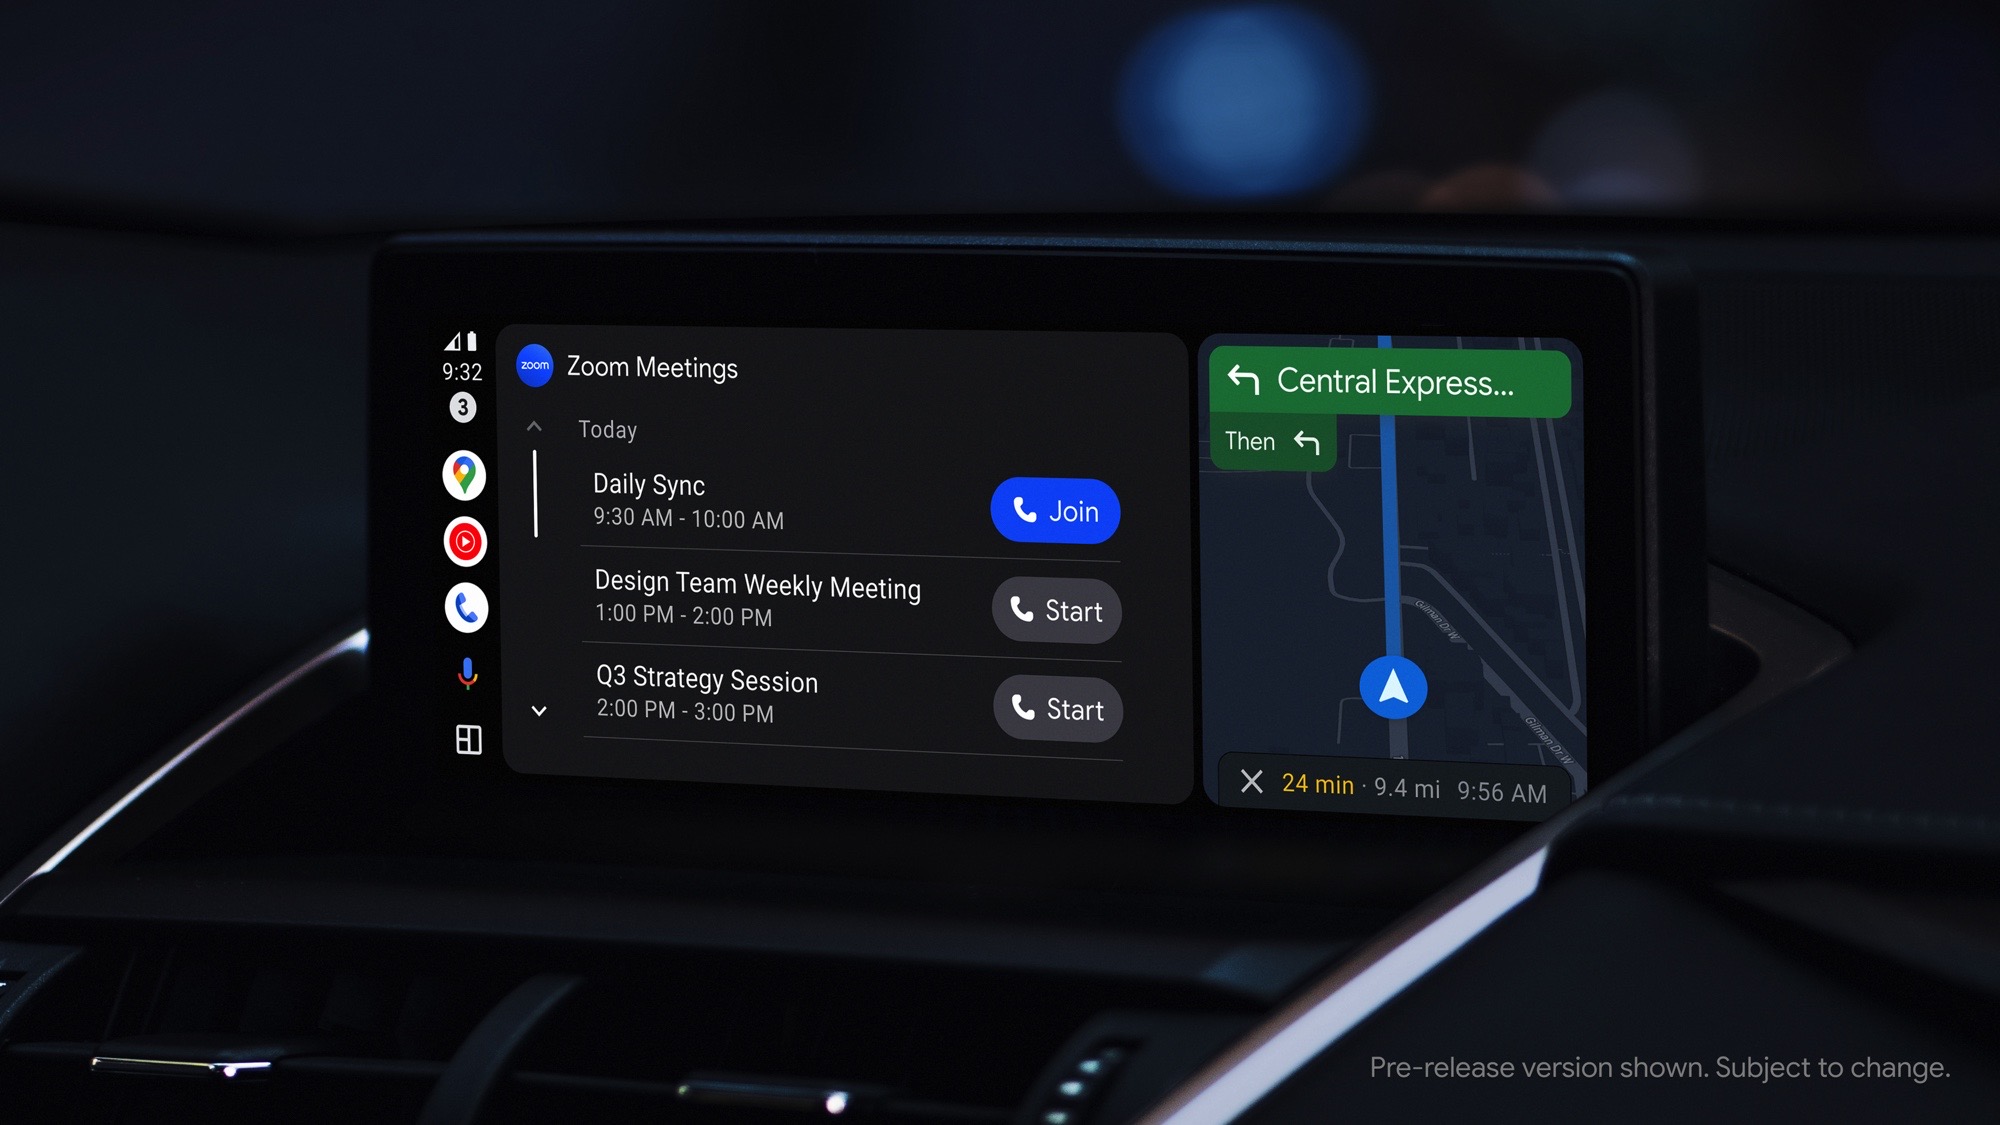 Google is bringing Zoom, Teams and Webex meetings to Android Auto